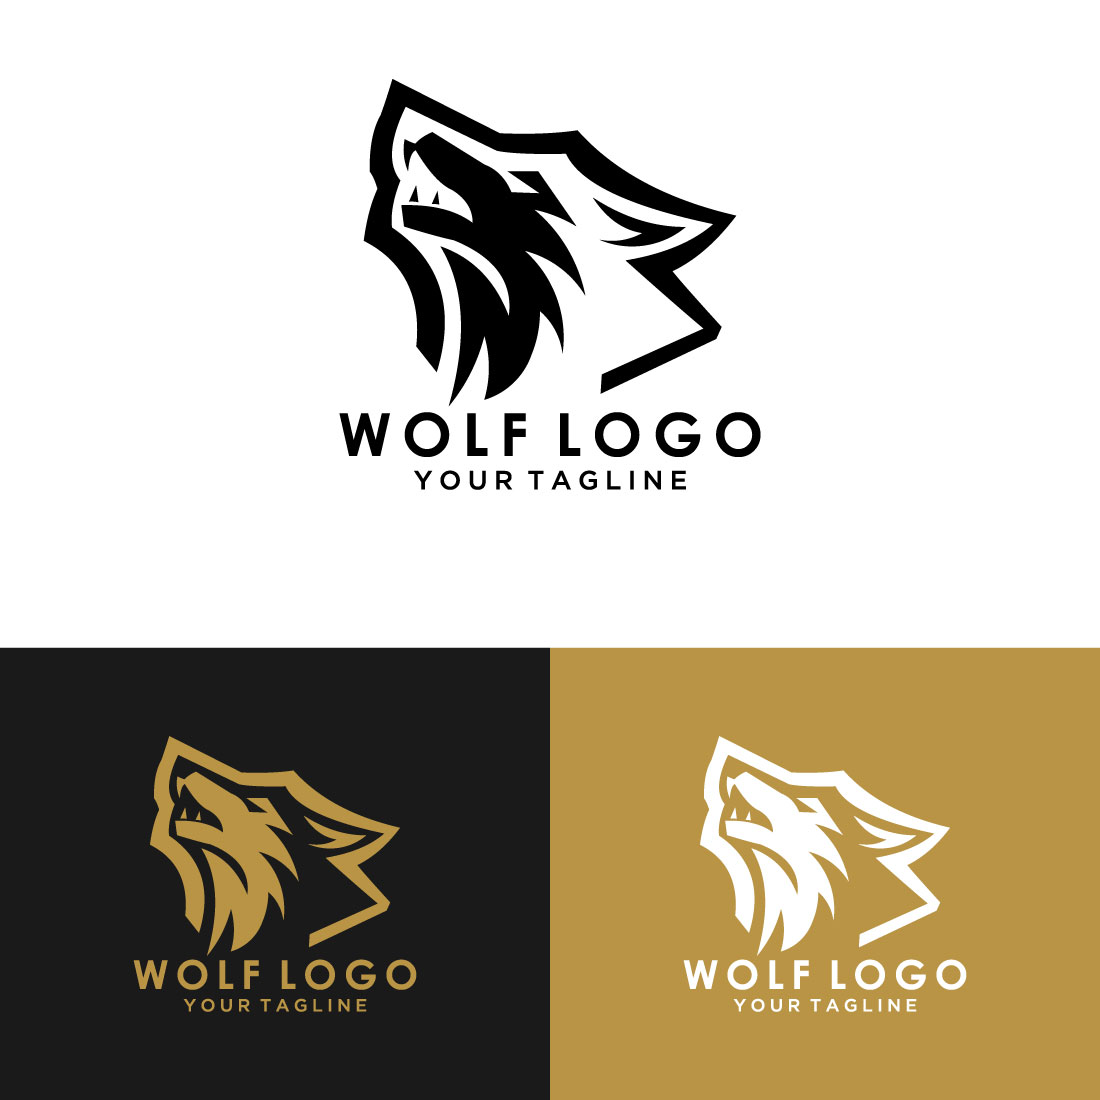 Wolf Eagle And Other Animals Logos Facebook Image.